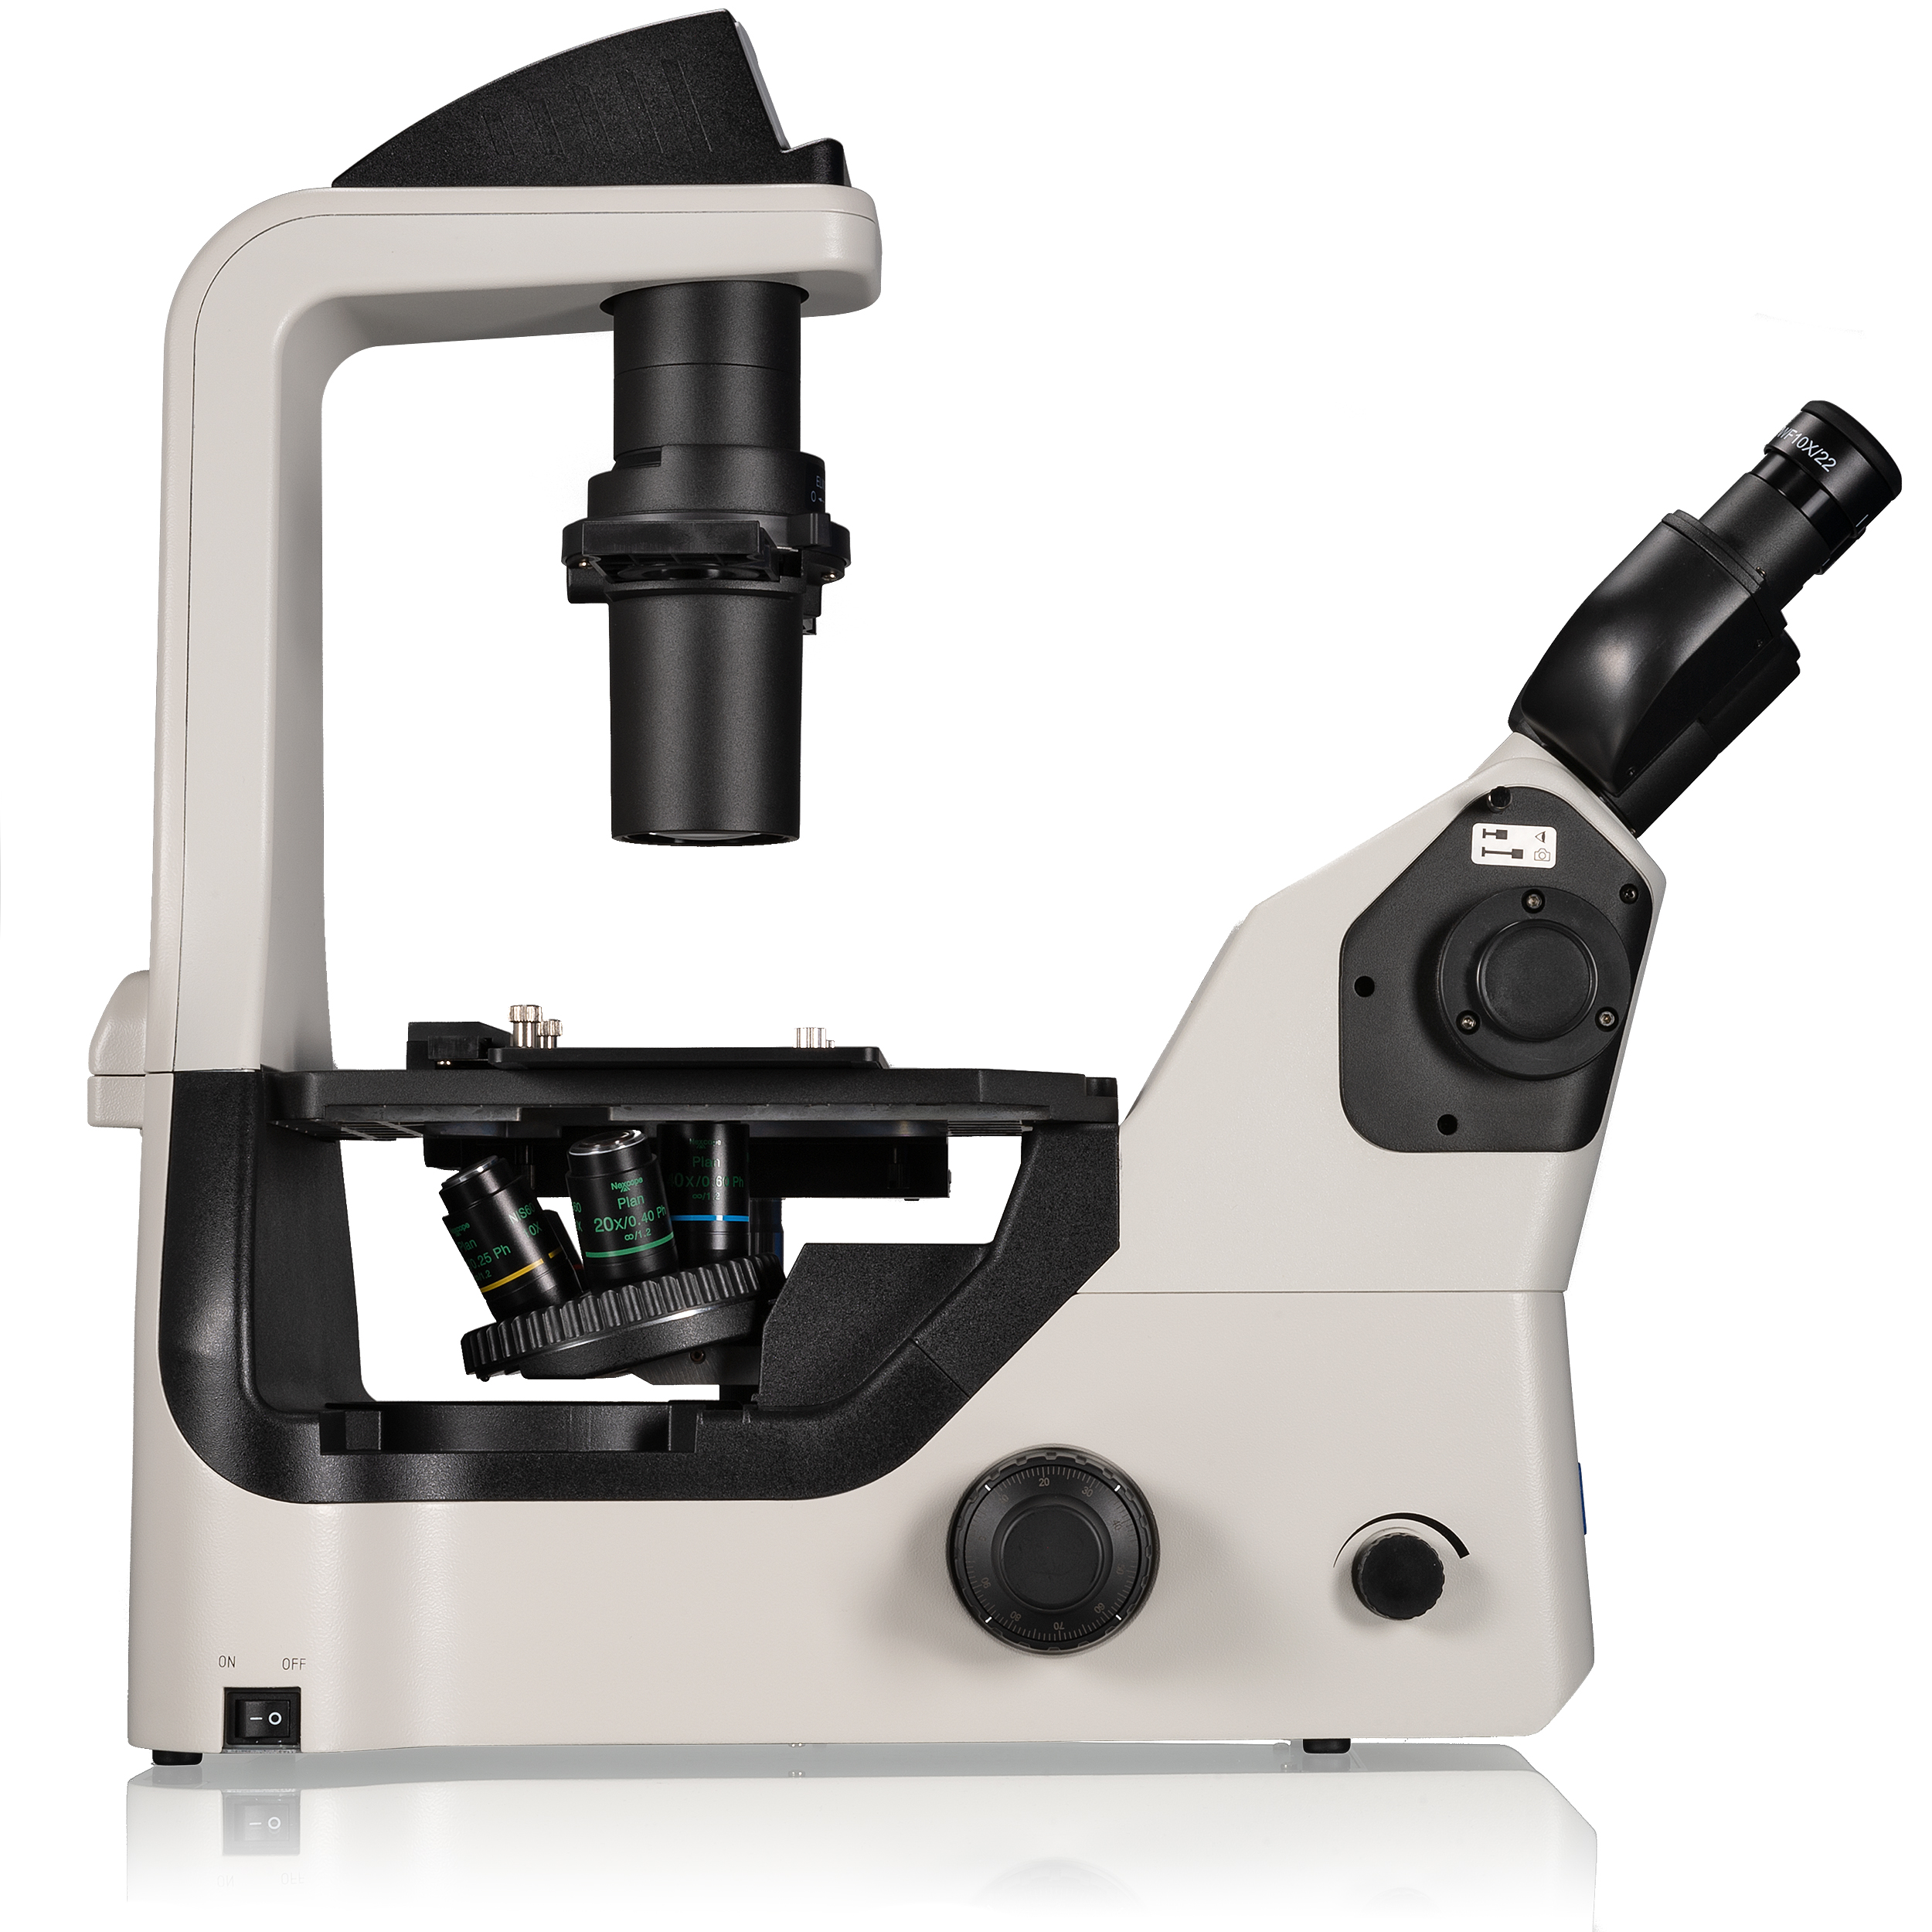 Nexcope NIB620 professional, inverted laboratory microscope with phase contrast